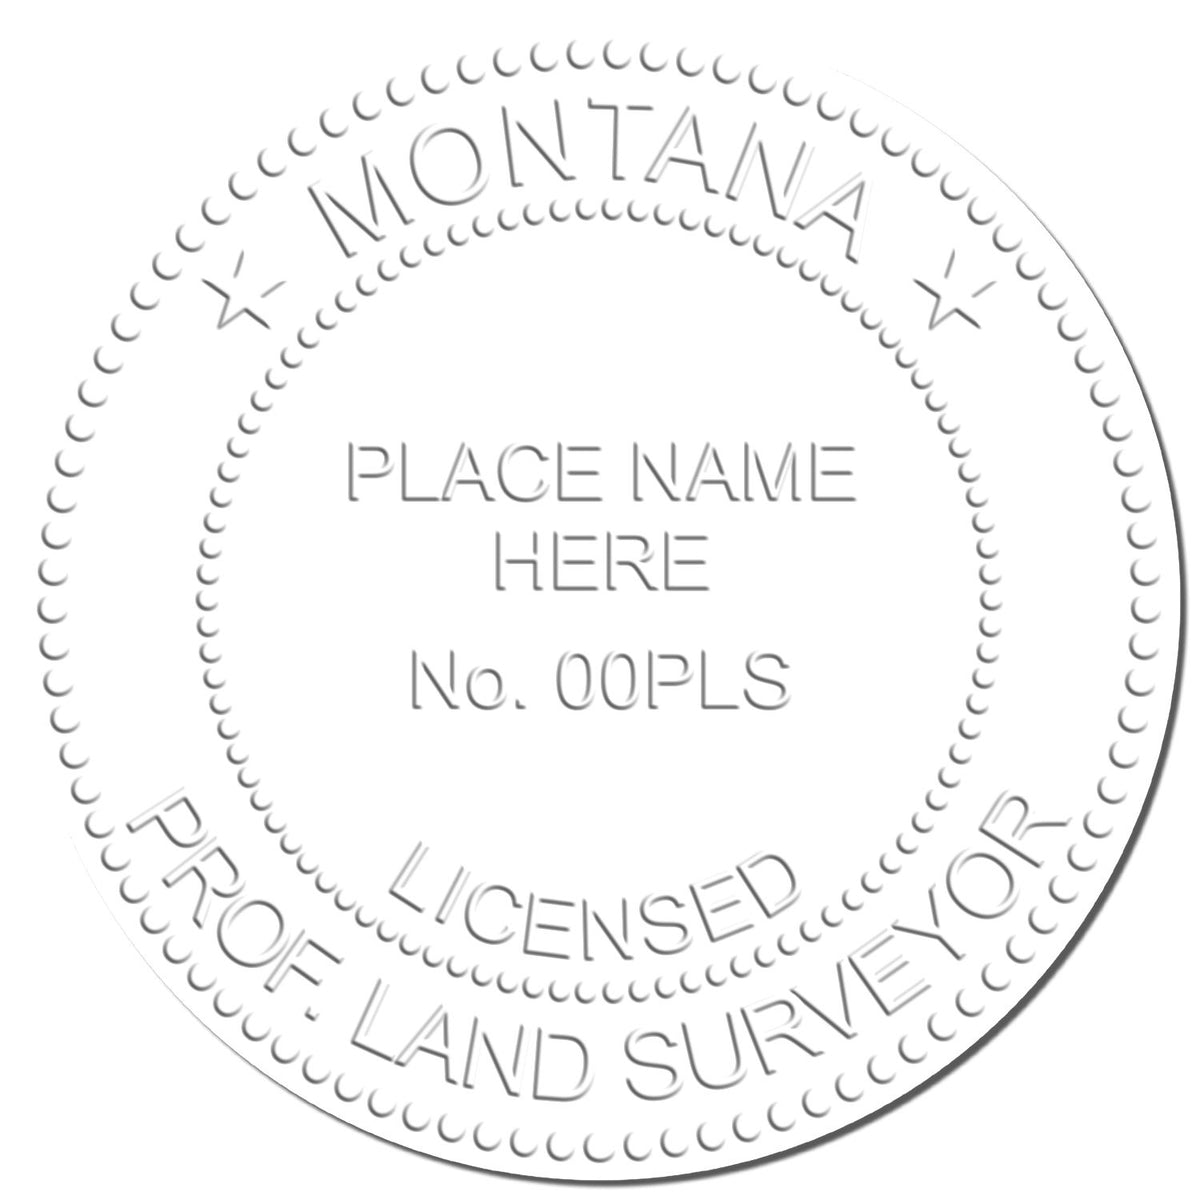 This paper is stamped with a sample imprint of the Montana Desk Surveyor Seal Embosser, signifying its quality and reliability.